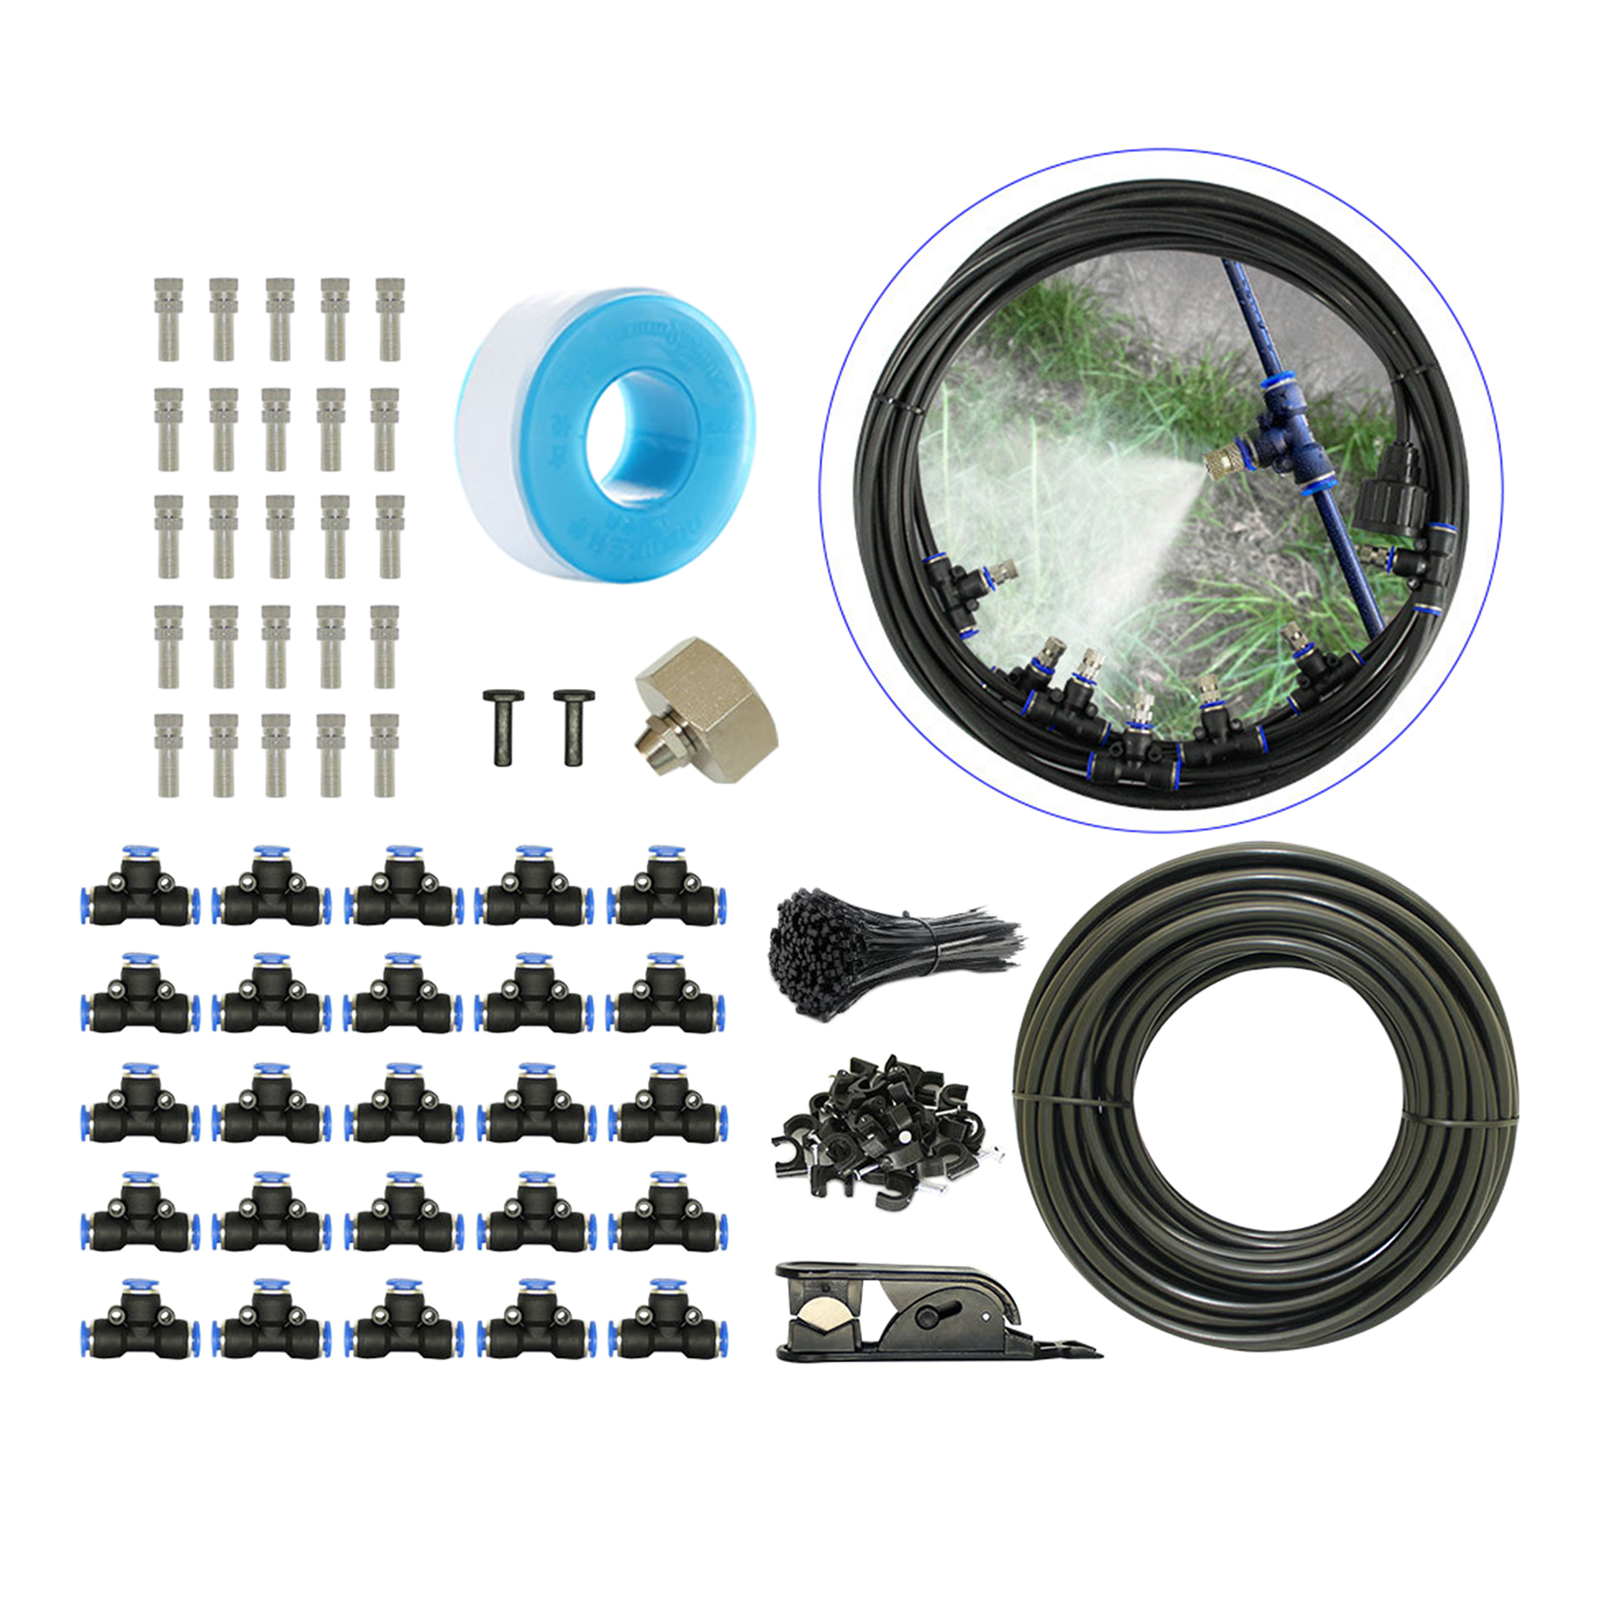 Water Mister Nozzles Set Outdoor Misting Cooling System Garden Irrigation